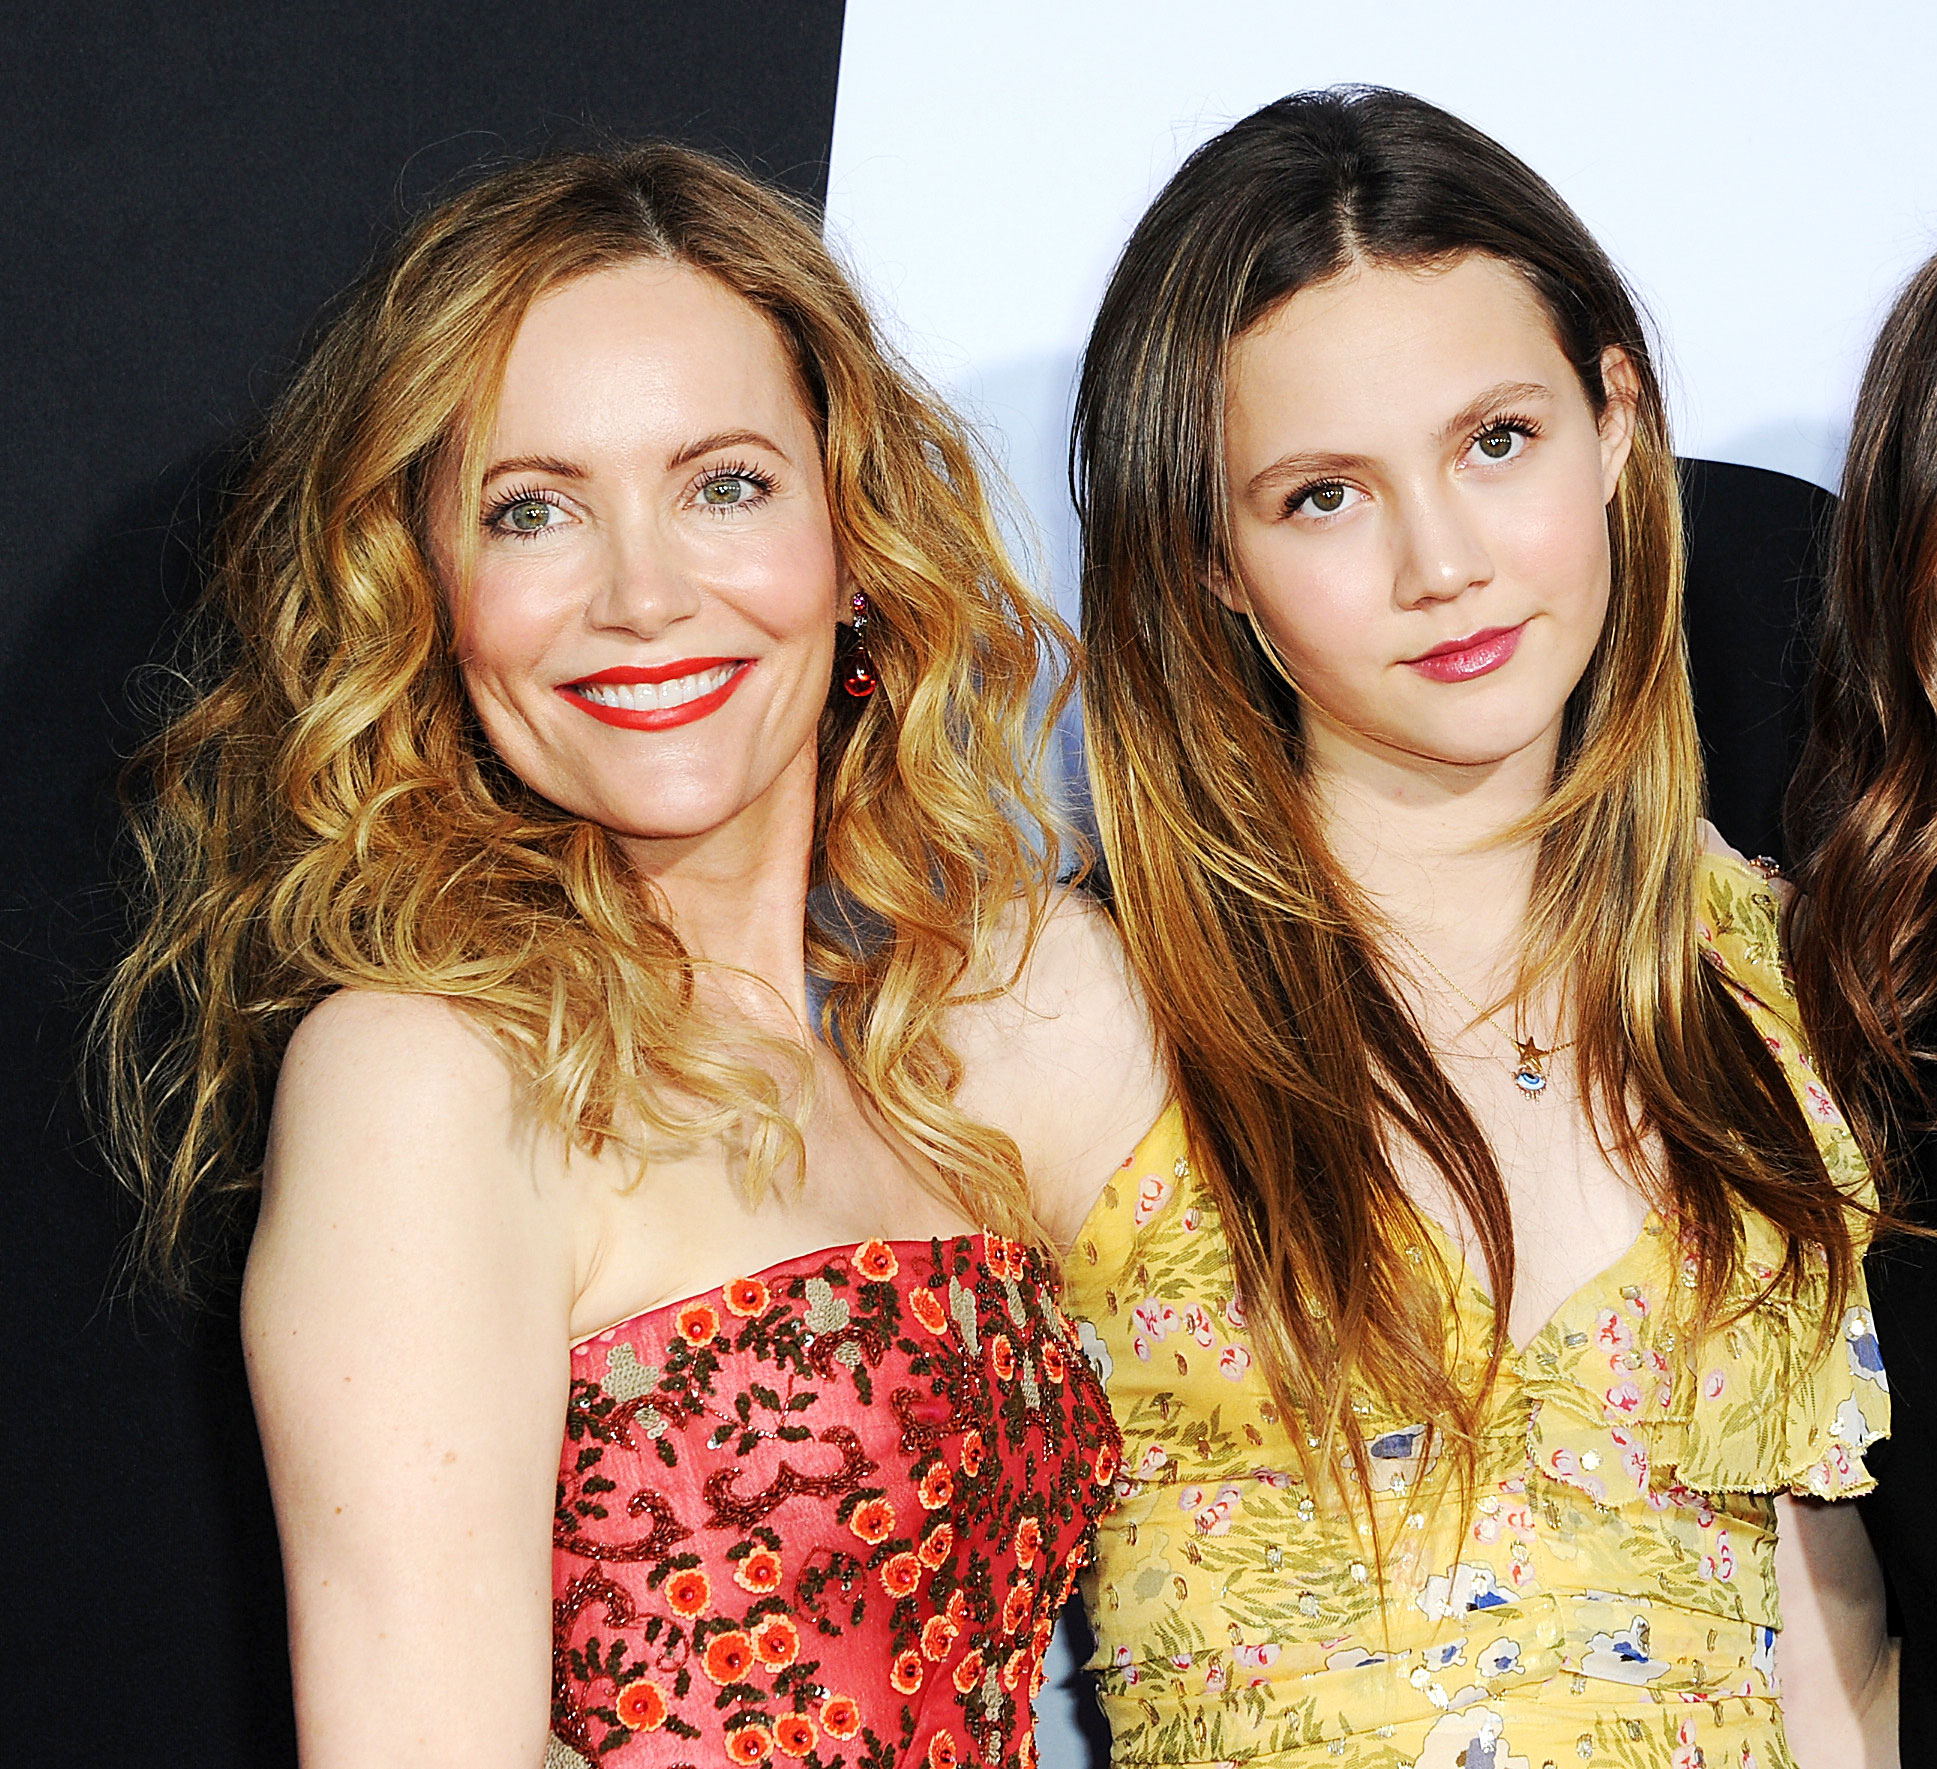 Leslie Mann reflects on her relationship with her daughters